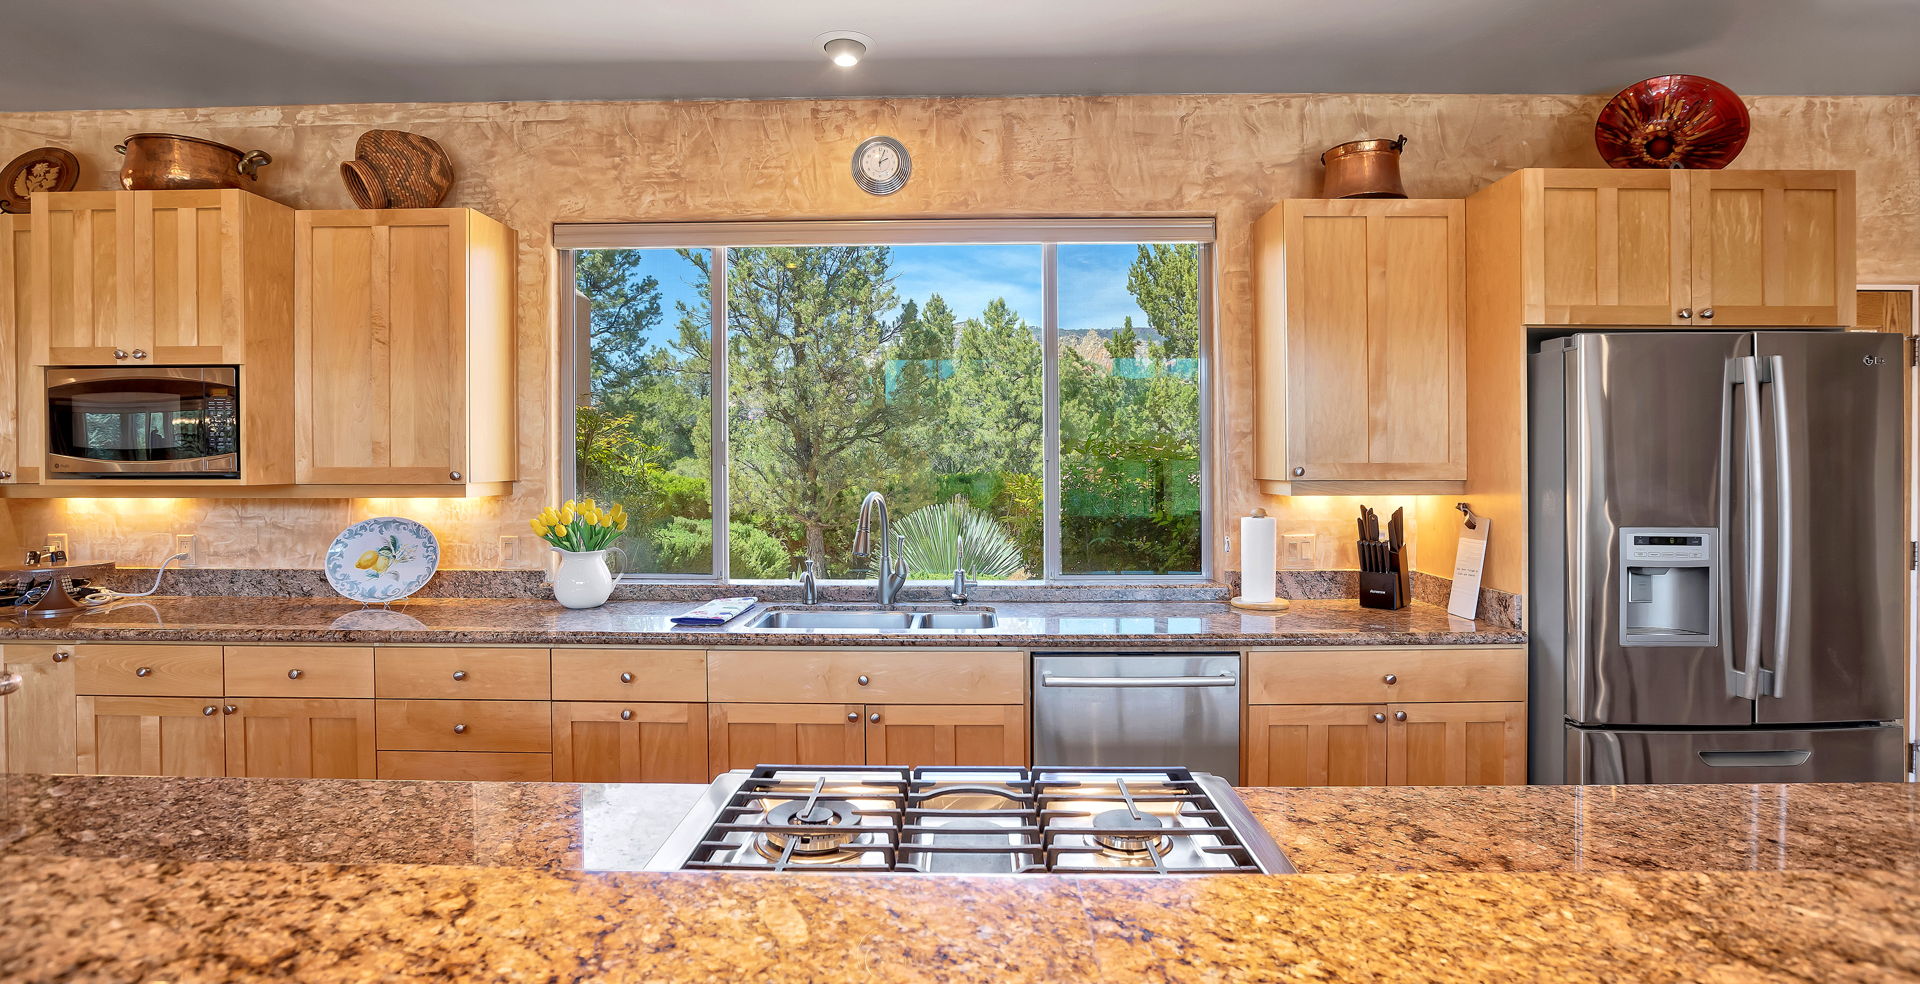 kitchen with a healthy amount of sunlight, refrigerator, dishwasher, gas stovetop, stainless steel microwave, and dark granite-like countertops